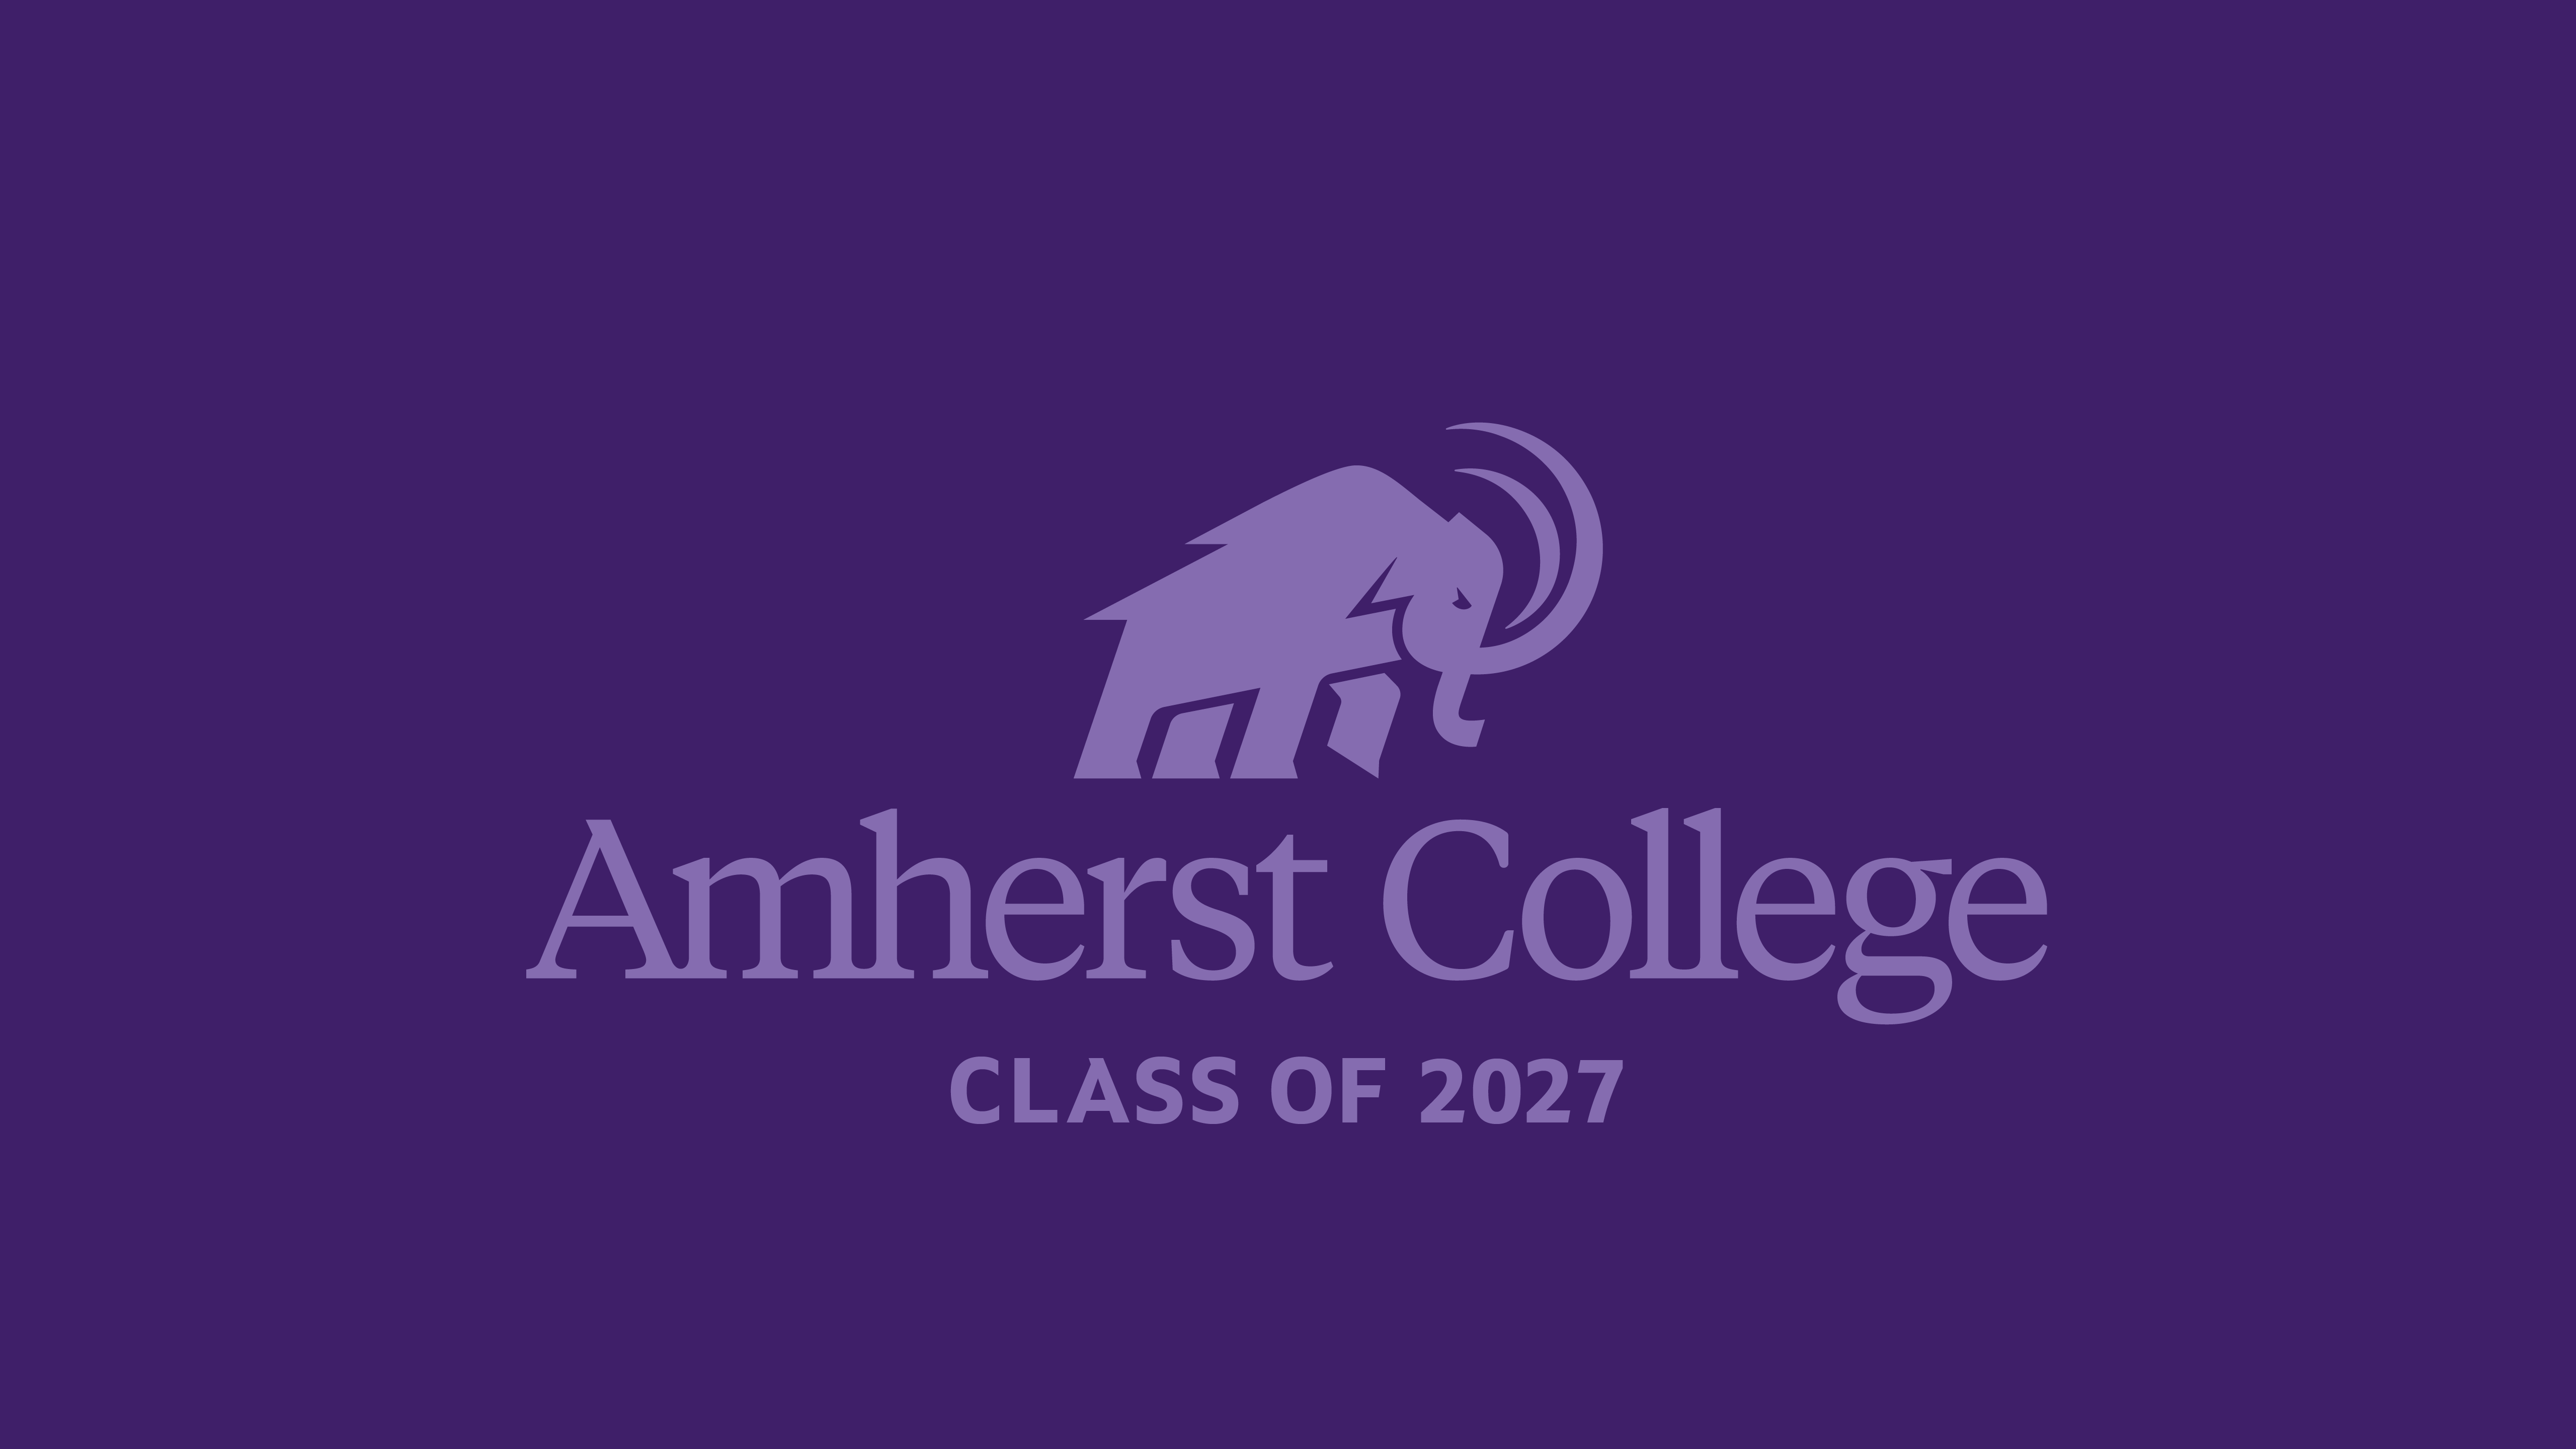 The Amherst Mammoth against a purple background with the words Amherst College Class of 2027